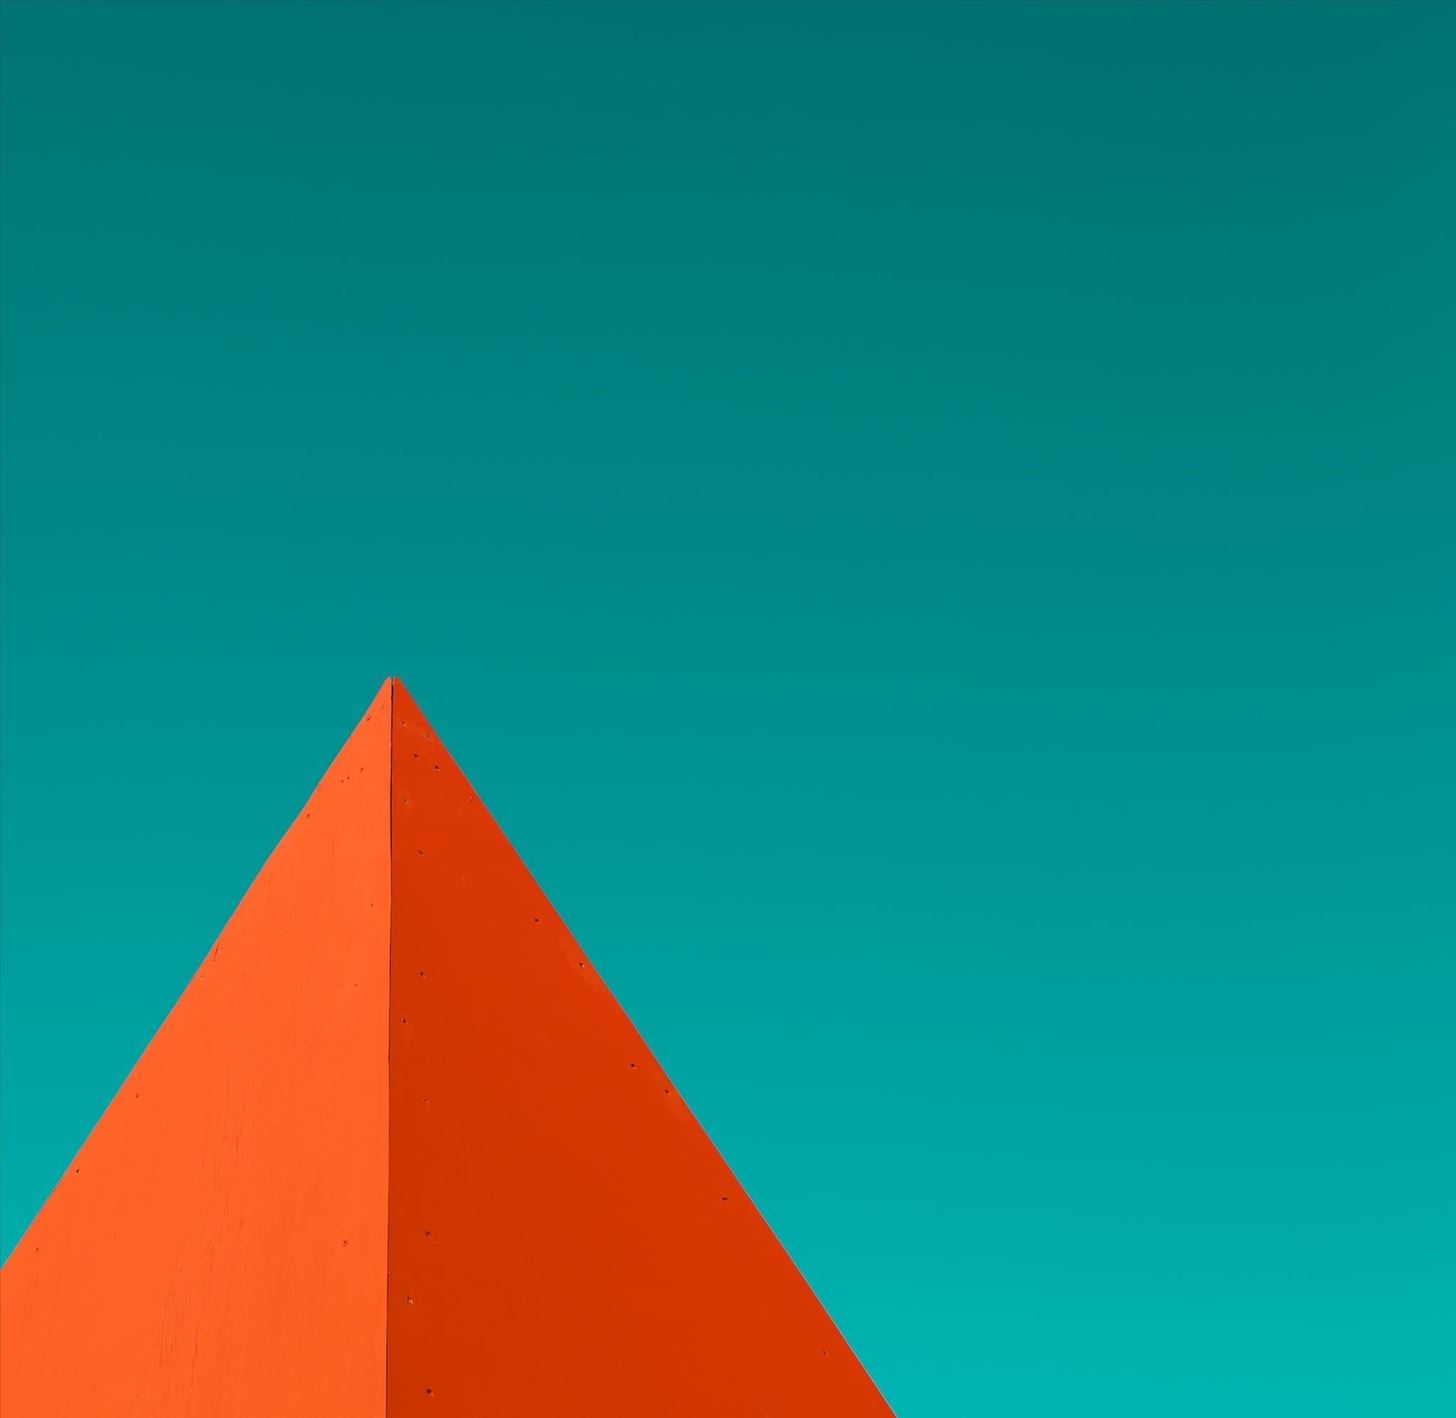 Download All the New Android Lollipop Wallpapers Right Now